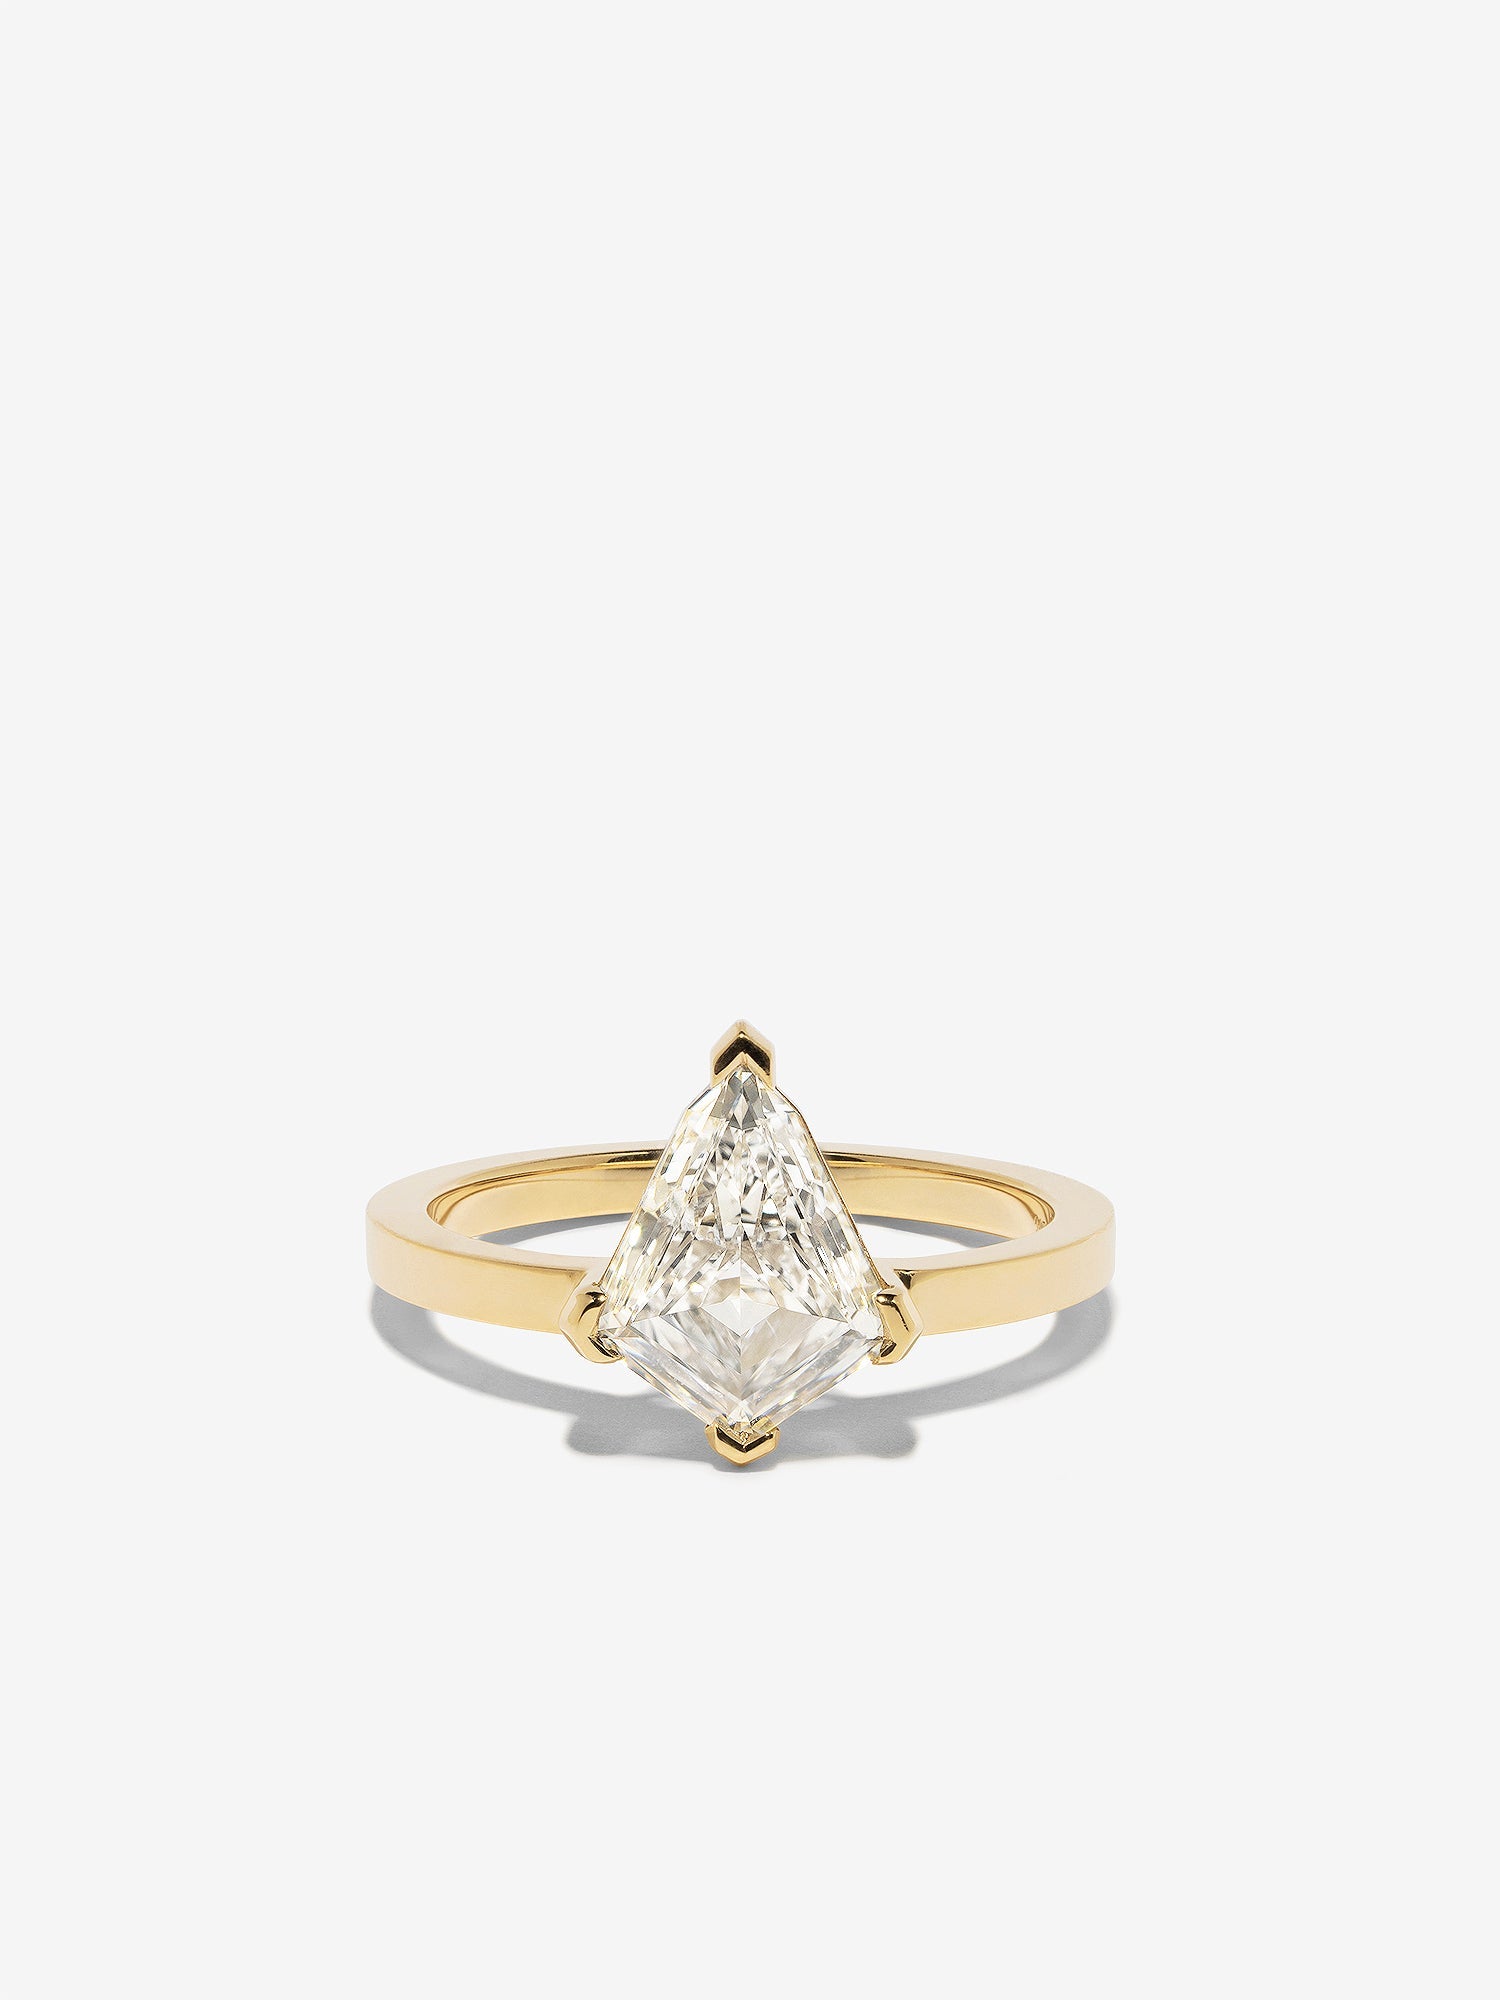 Solitaire Kite Diamond in Prongs with Straight Edge Band